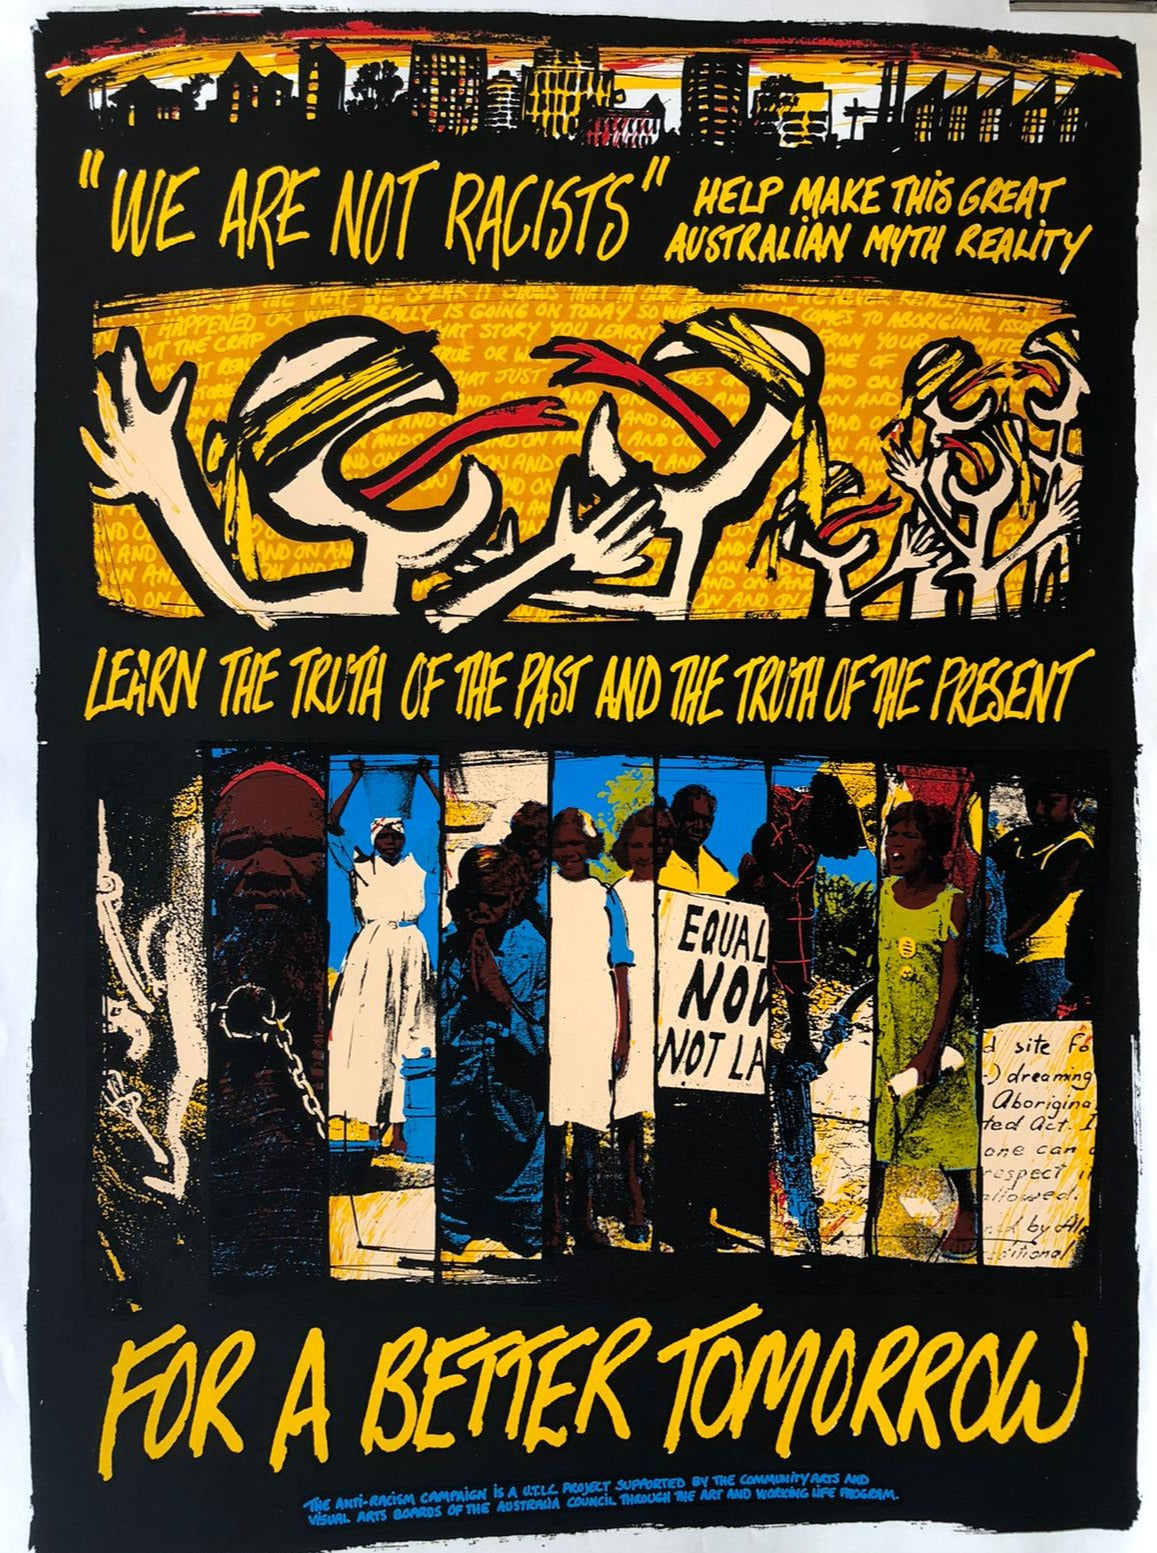 "We Are Not Racists" Australian Anti-Racism 1980s Campaign Poster